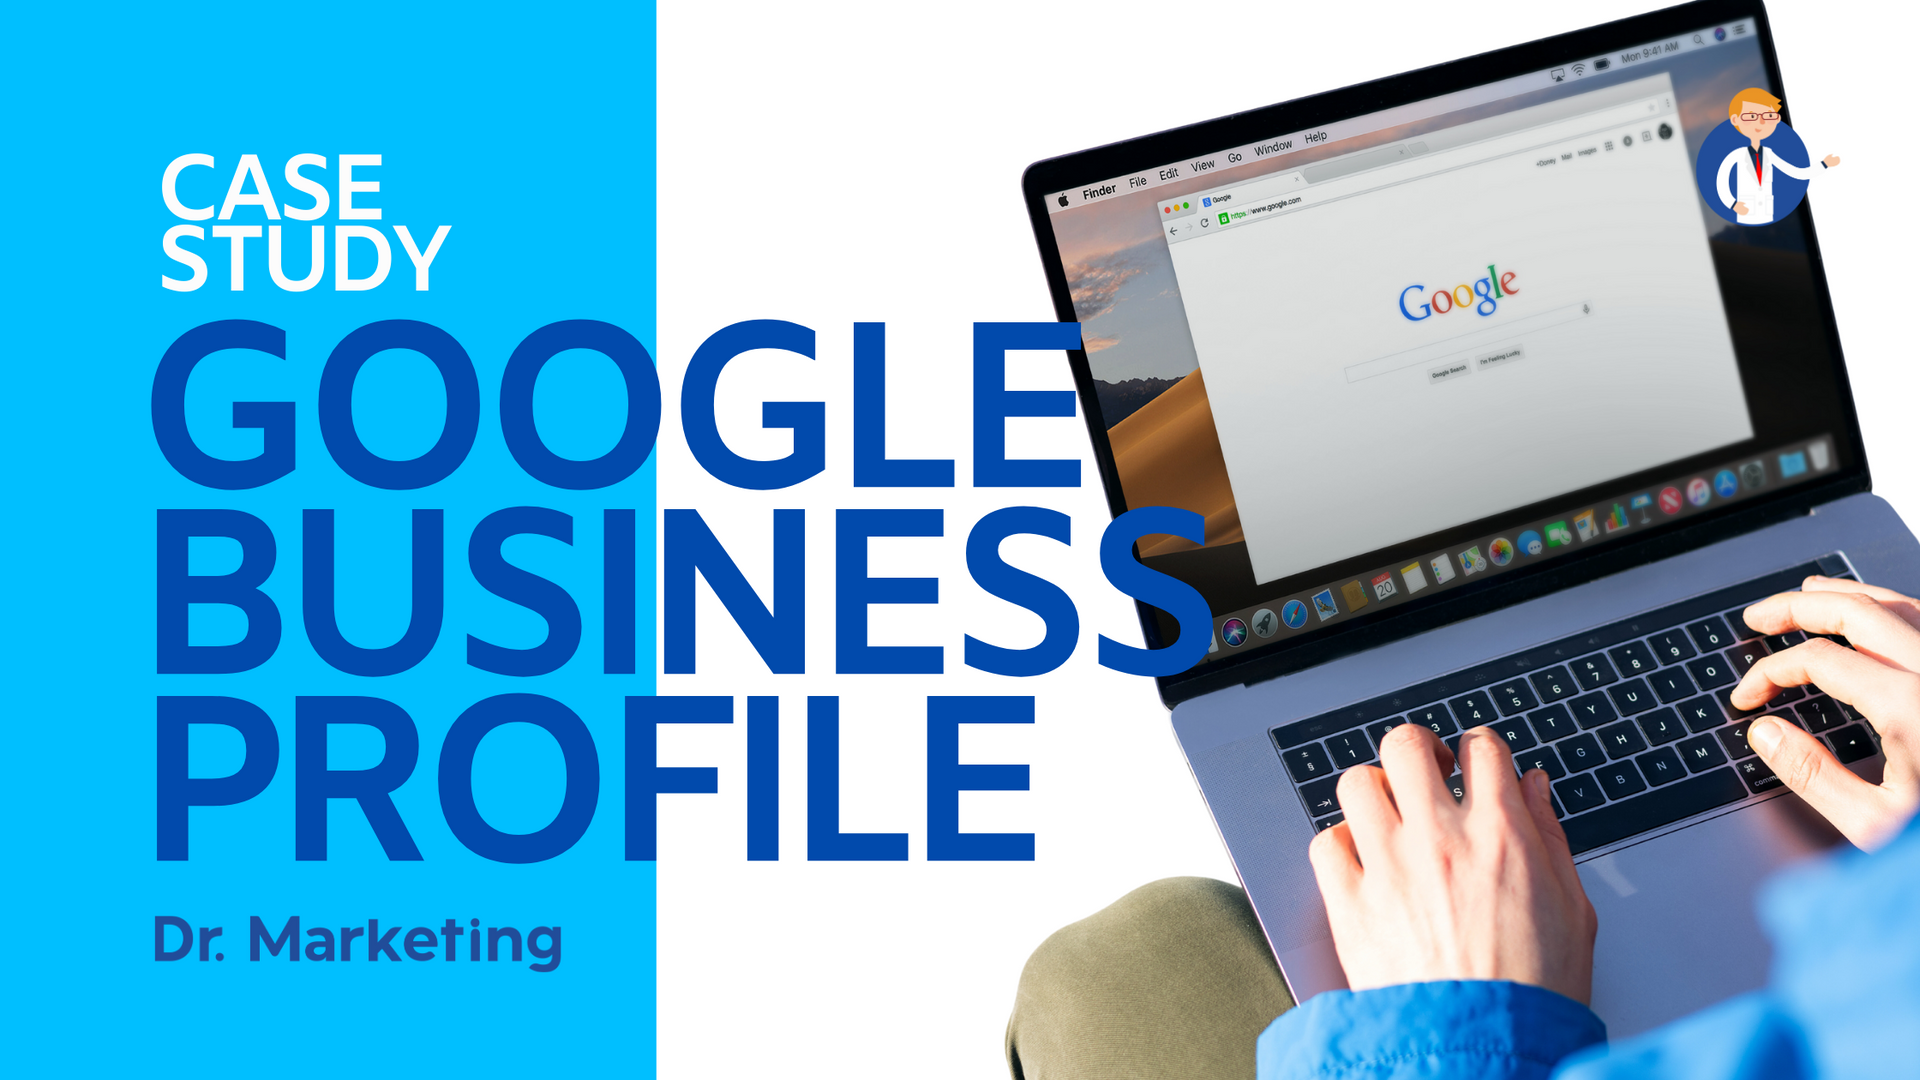 case study google business profile by dr. marketing